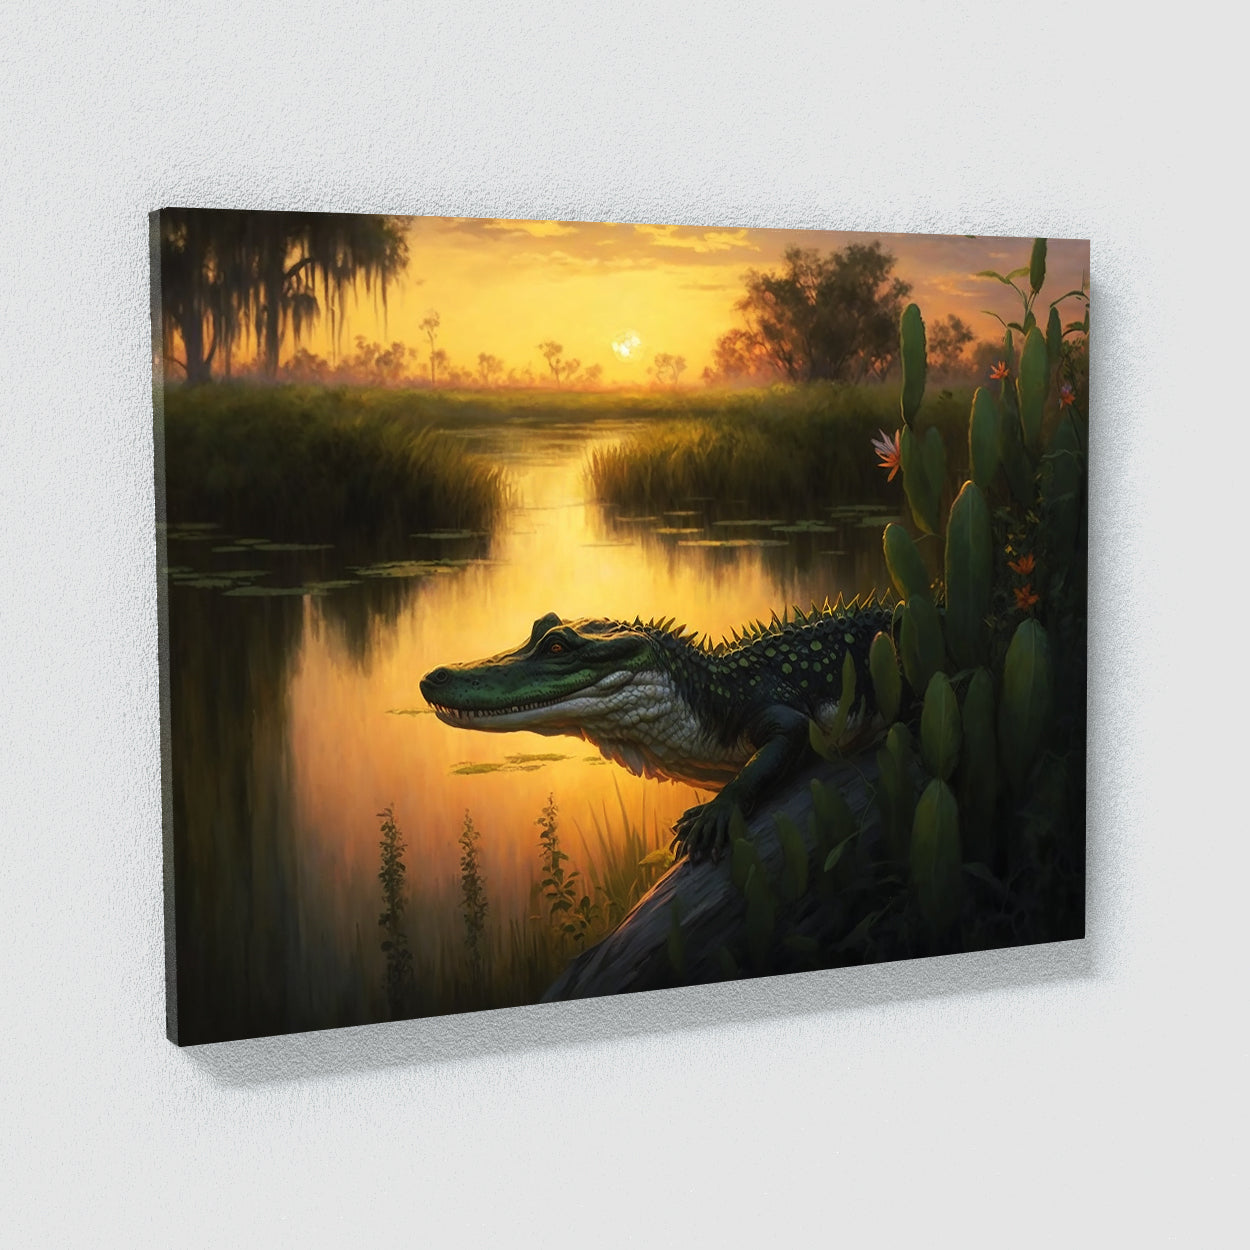 Alligator In Swamp With Sunset 15 Canvas Wall Art Print Decor Artwork  Picture Painting Poster – Sense Canvas